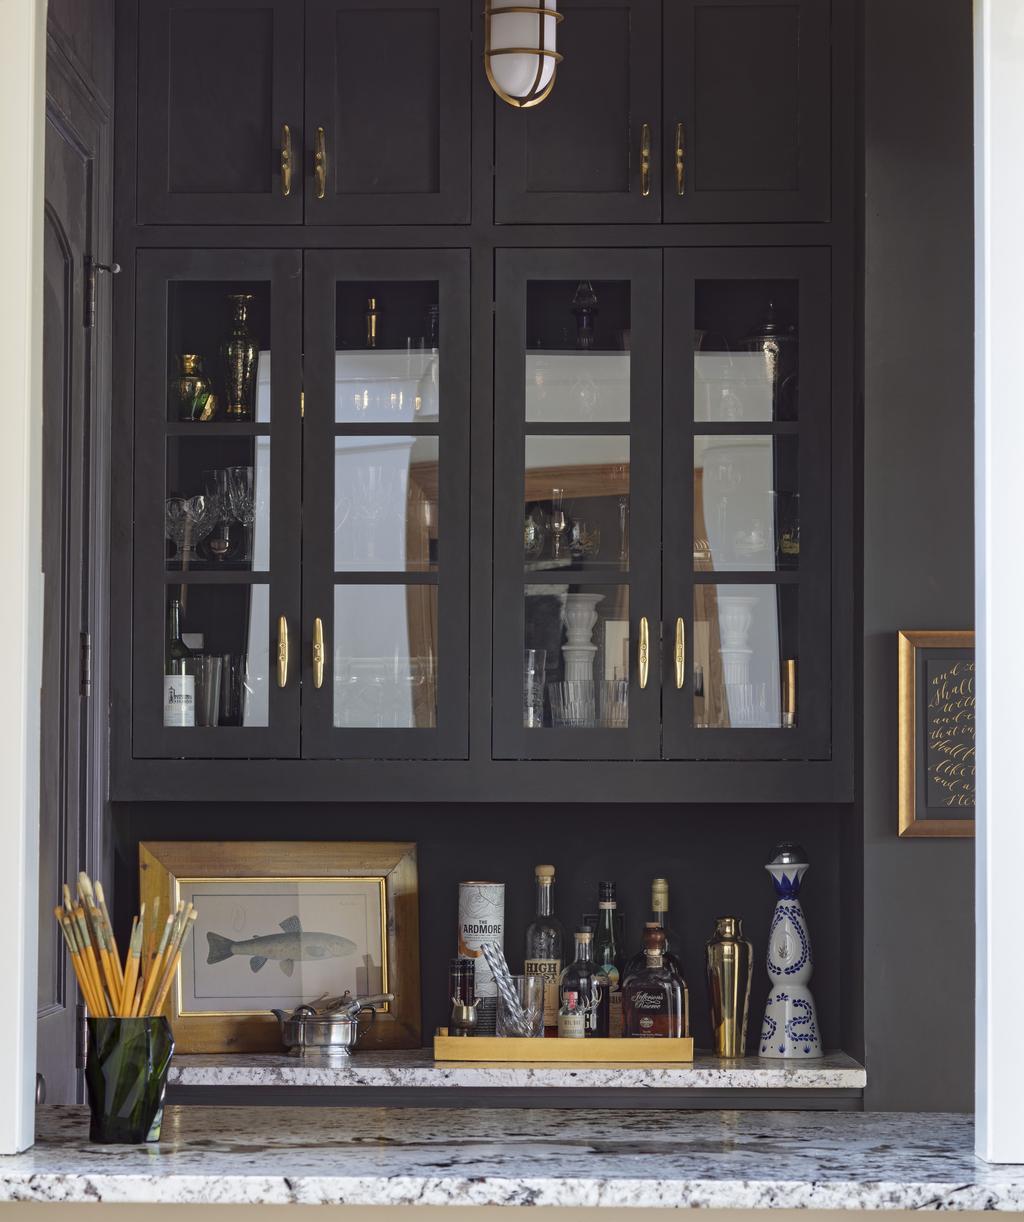 Checking in: the elevator vestibule features a built-in bar An airy vignette n the foyer This house is incredibly open, but still cozy. How did you manage that balance?